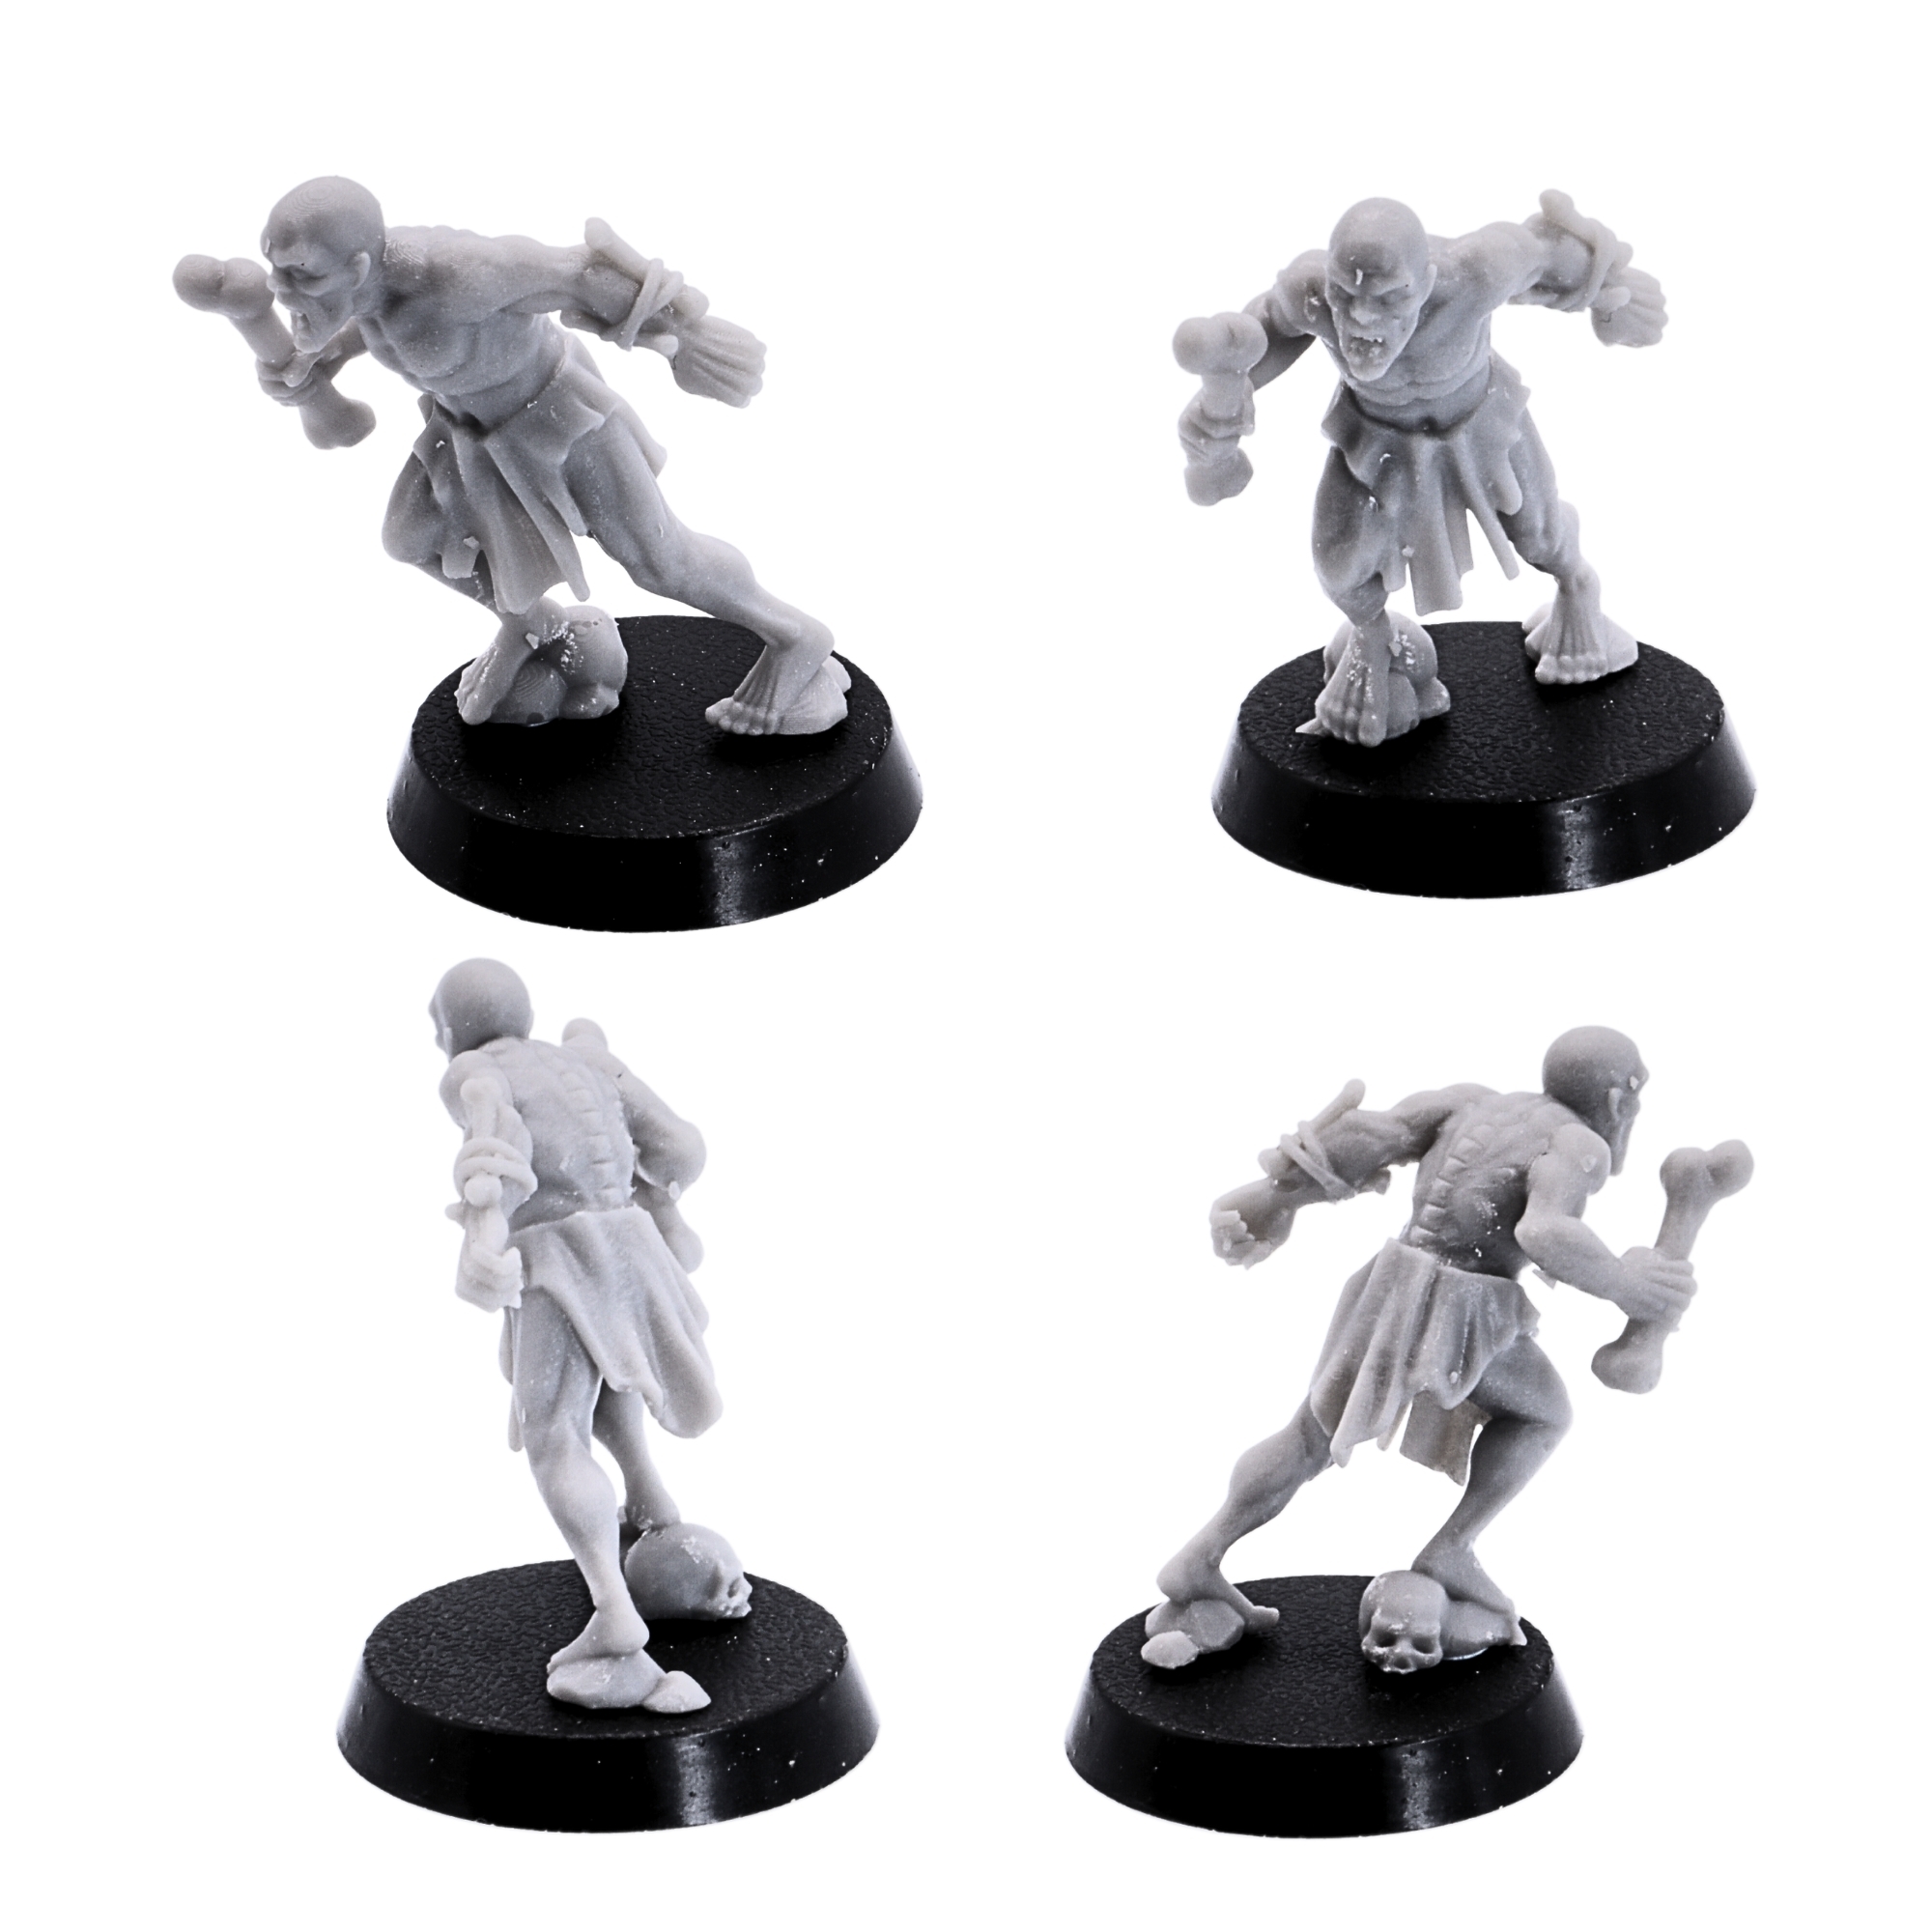 Wargaming Undead Miniatures designed by Highlands Miniatures